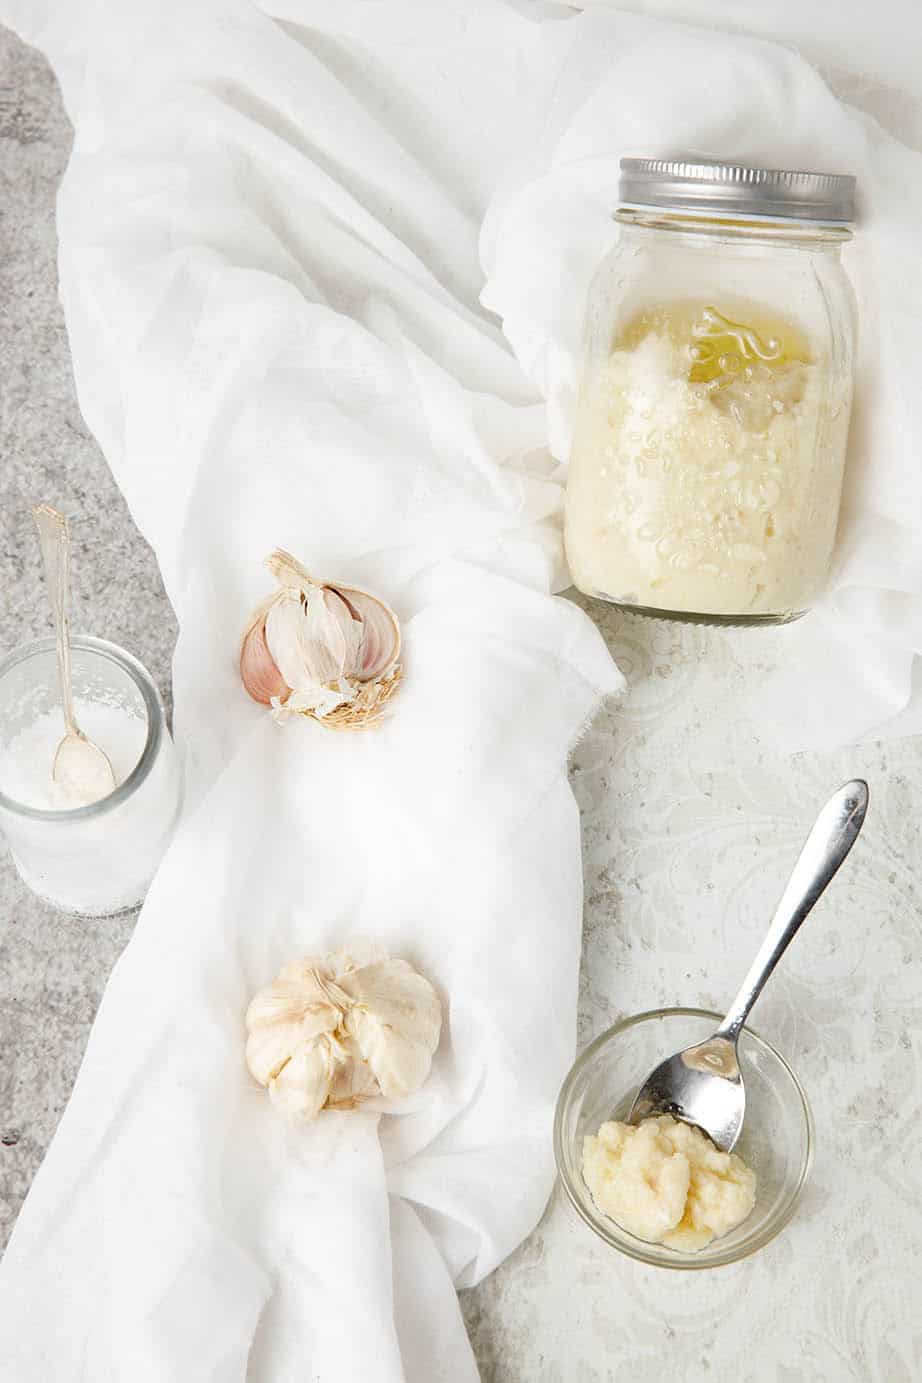 Overhead shot of homemade garlic paste on a white background showing ingredients